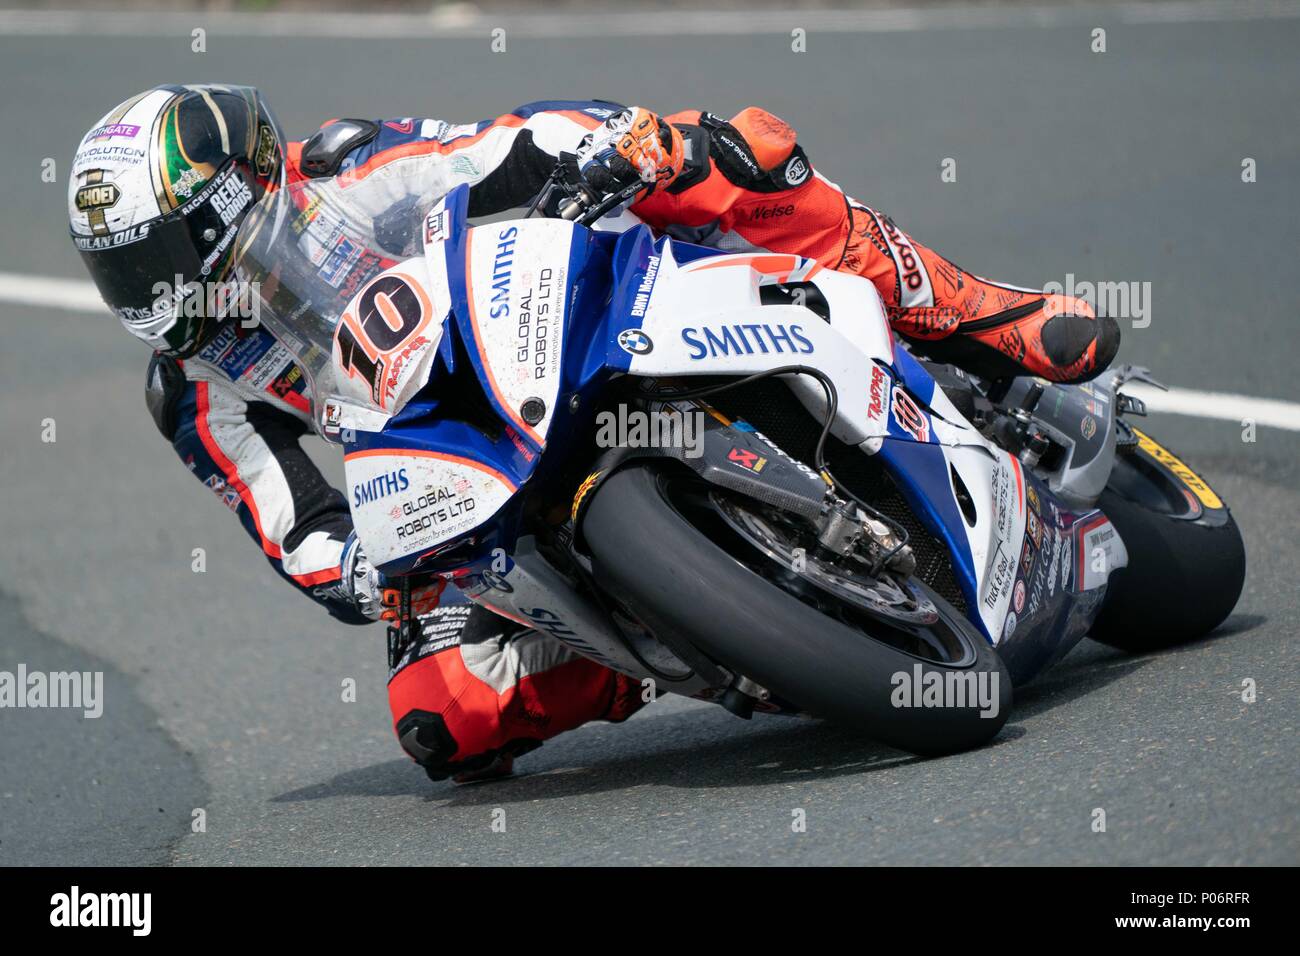 Isle of Man. 8th Jun, 2018. Senior TT Race 2018 Isle of Man  Peter Hickman - the faster road racer on the planet. The isle of Man - the fastest road race on the planet Credit: News Images /Alamy Live News Stock Photo